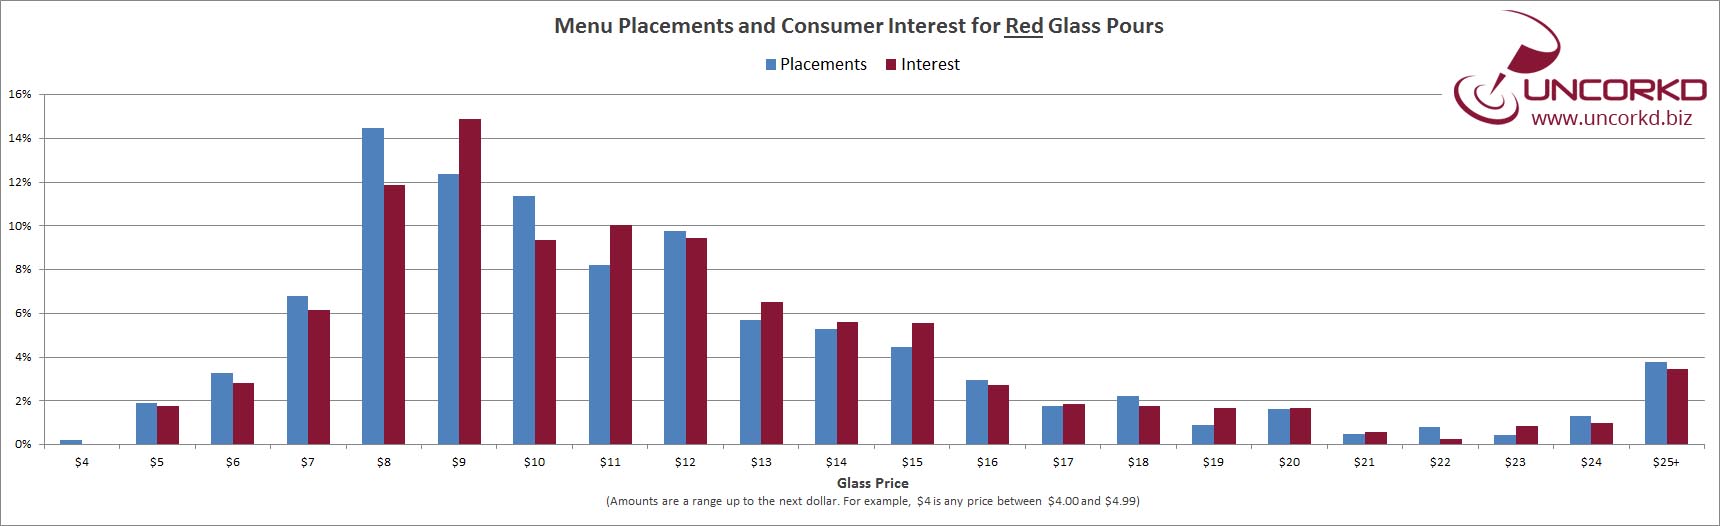 Wine Glass Pricing, Placements and Interest for Red Wine